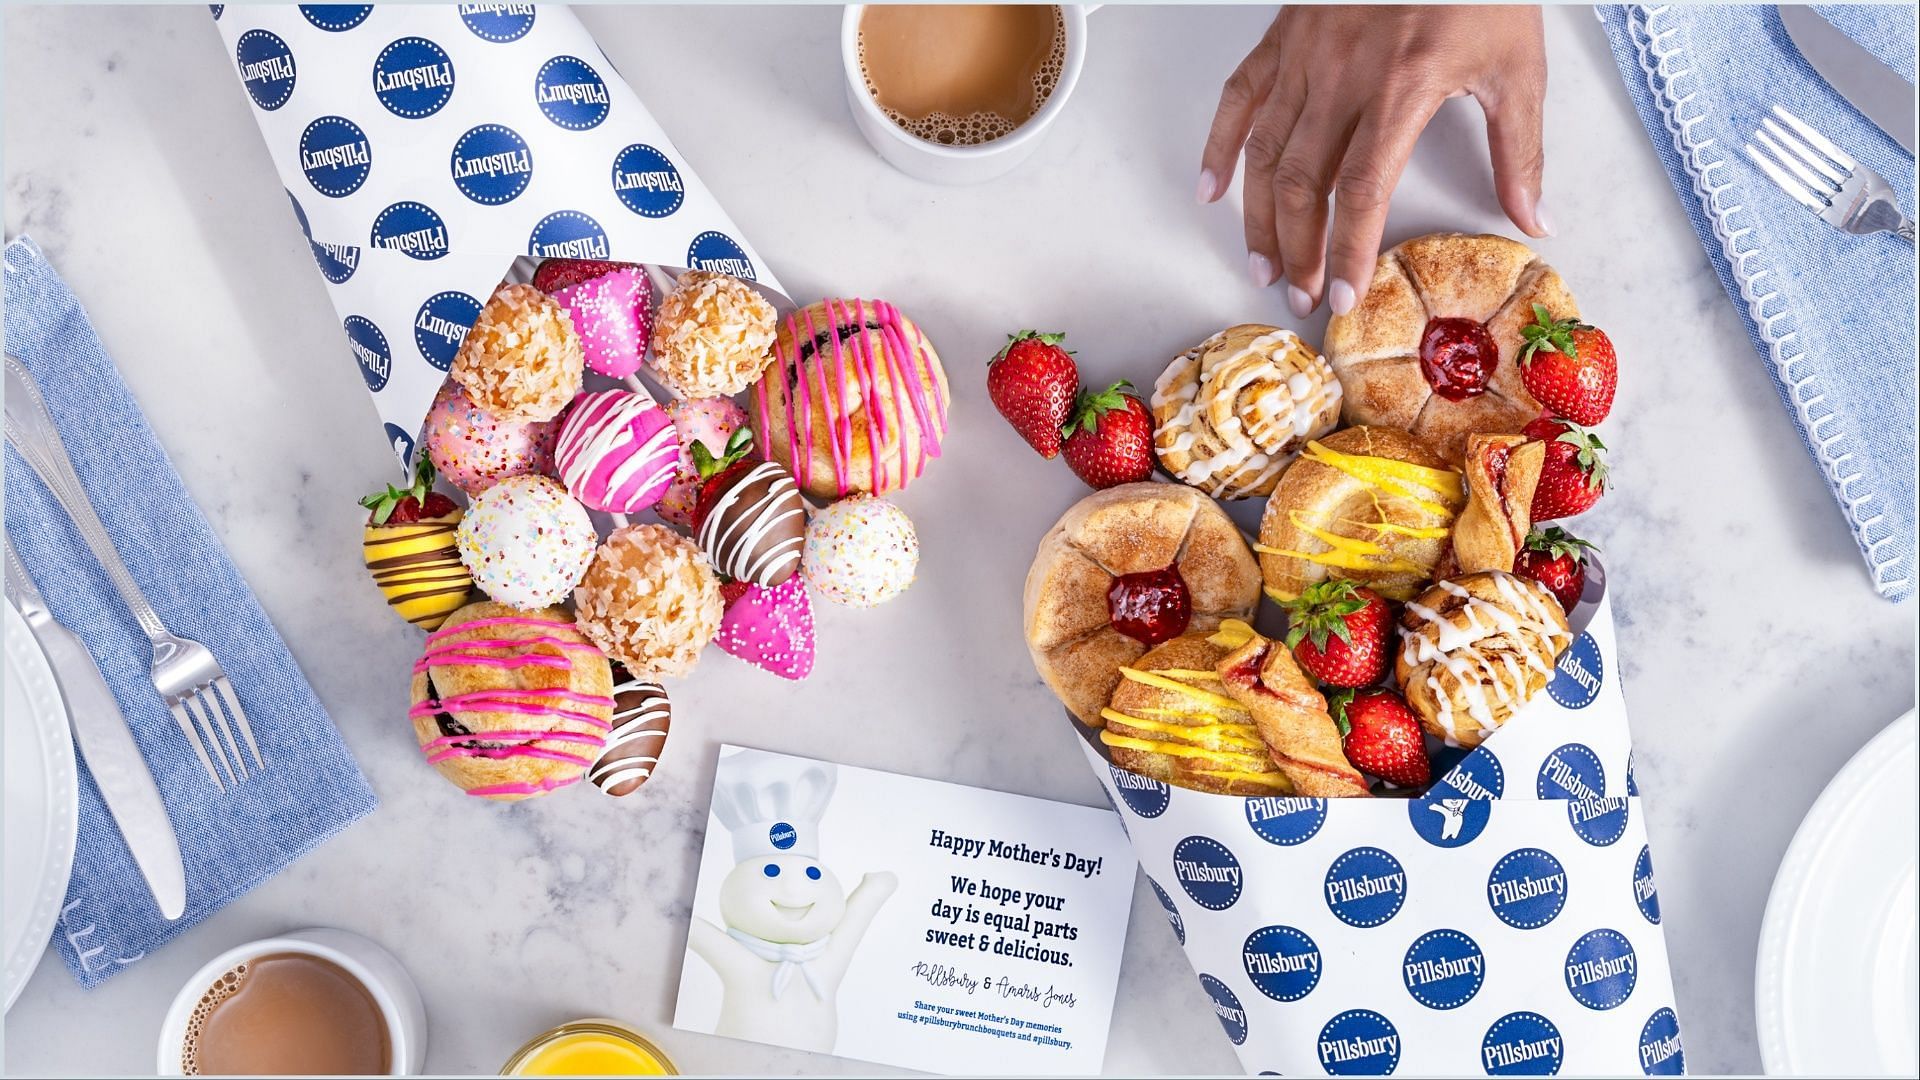 Pillsbury introduces new Brunch Bouquets for Mother